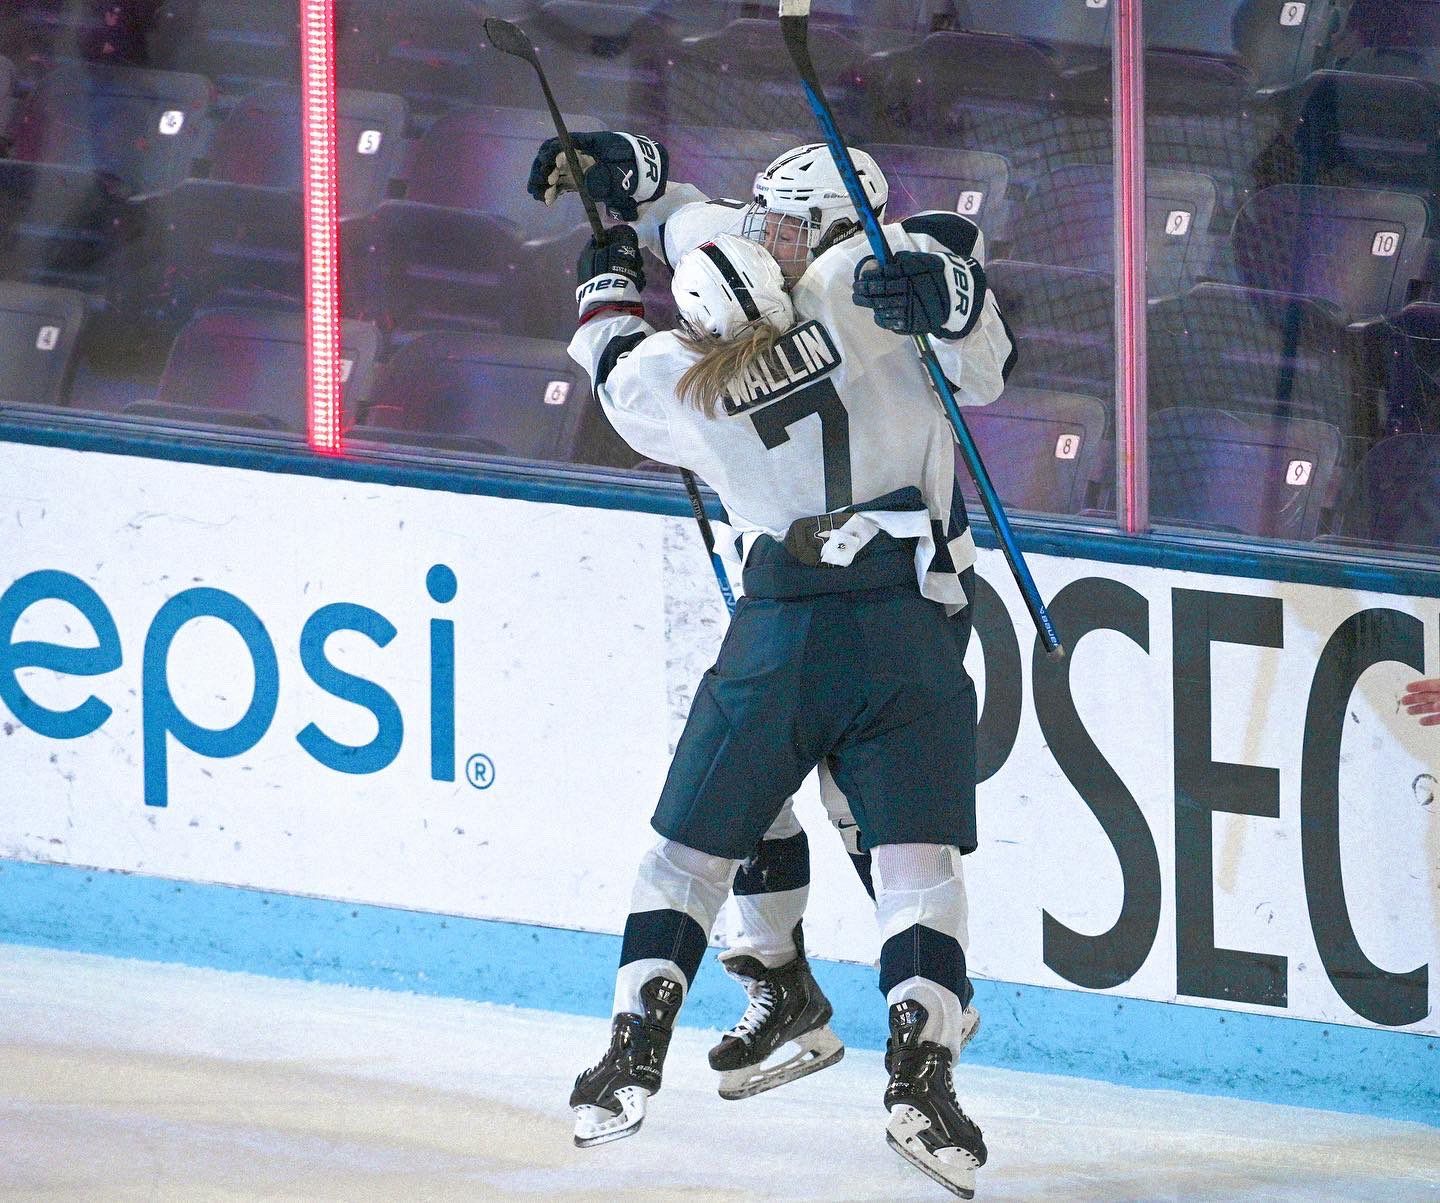 NCAA Women's Hockey: What to Watch, September 30 - October 2